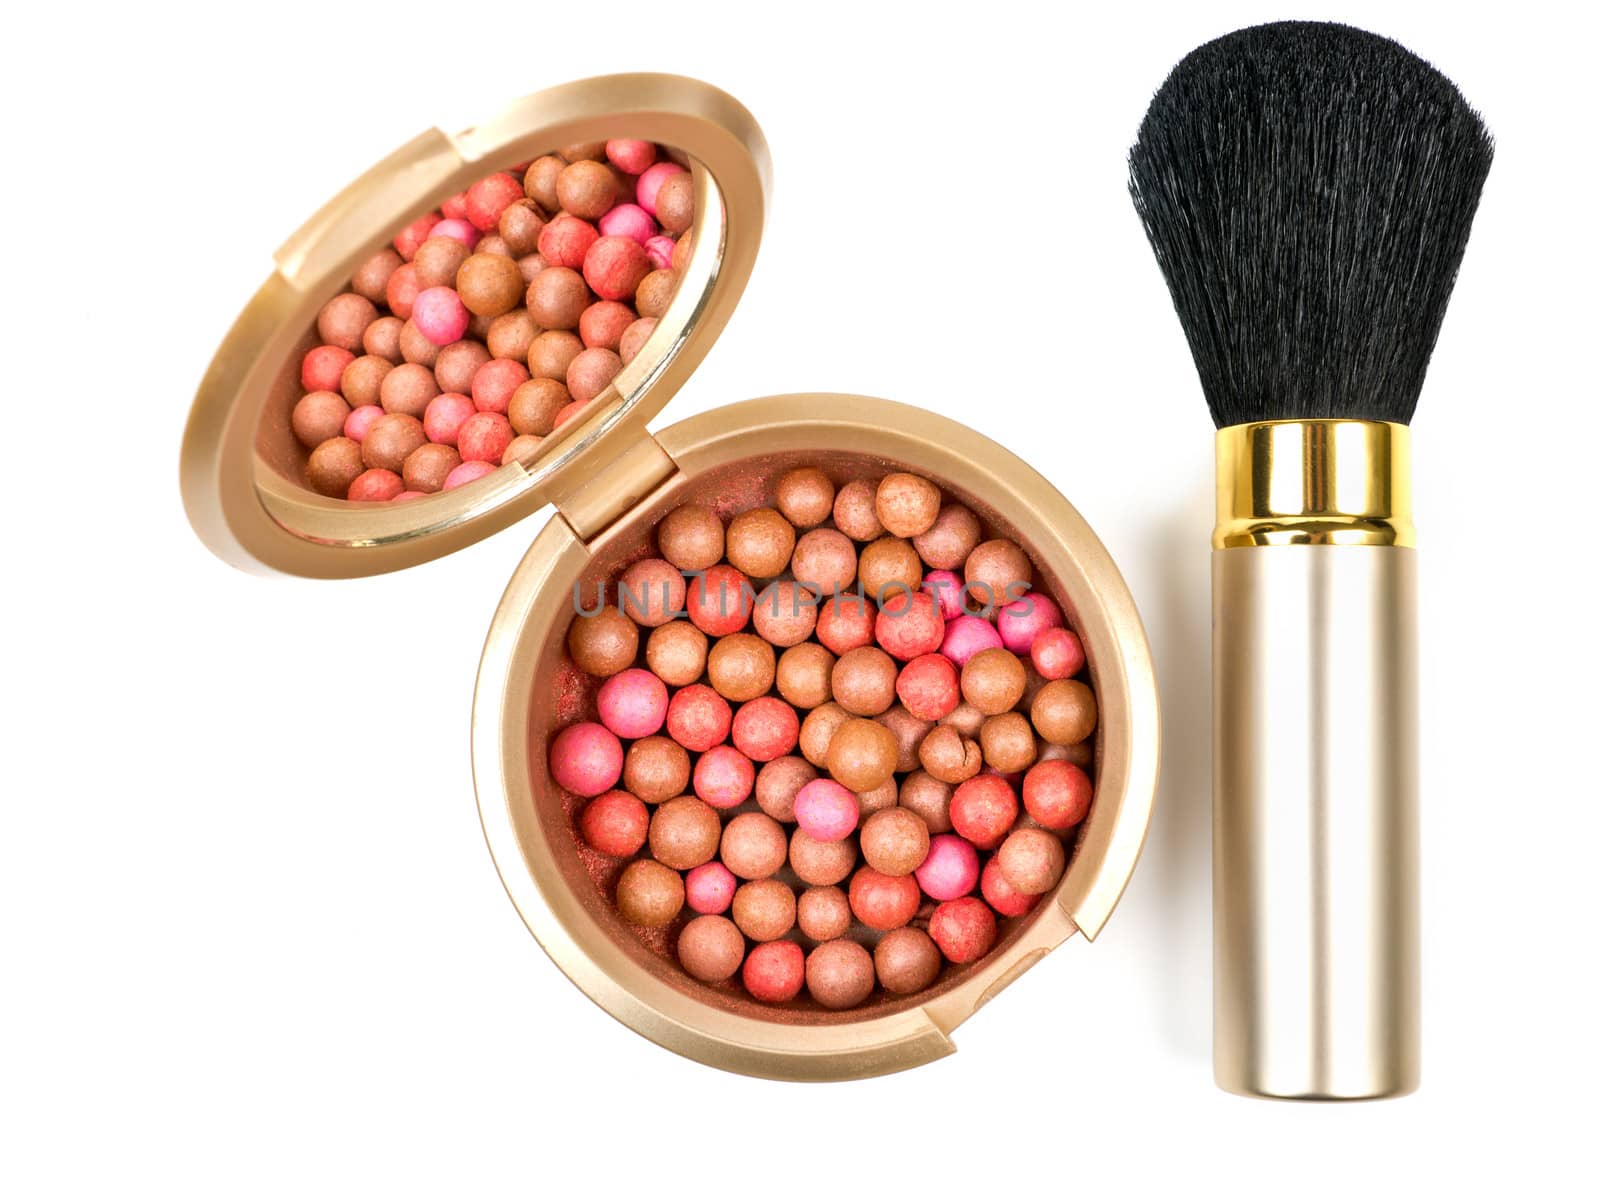 Bronzing pearls in powder box with mirror and make up brush over white